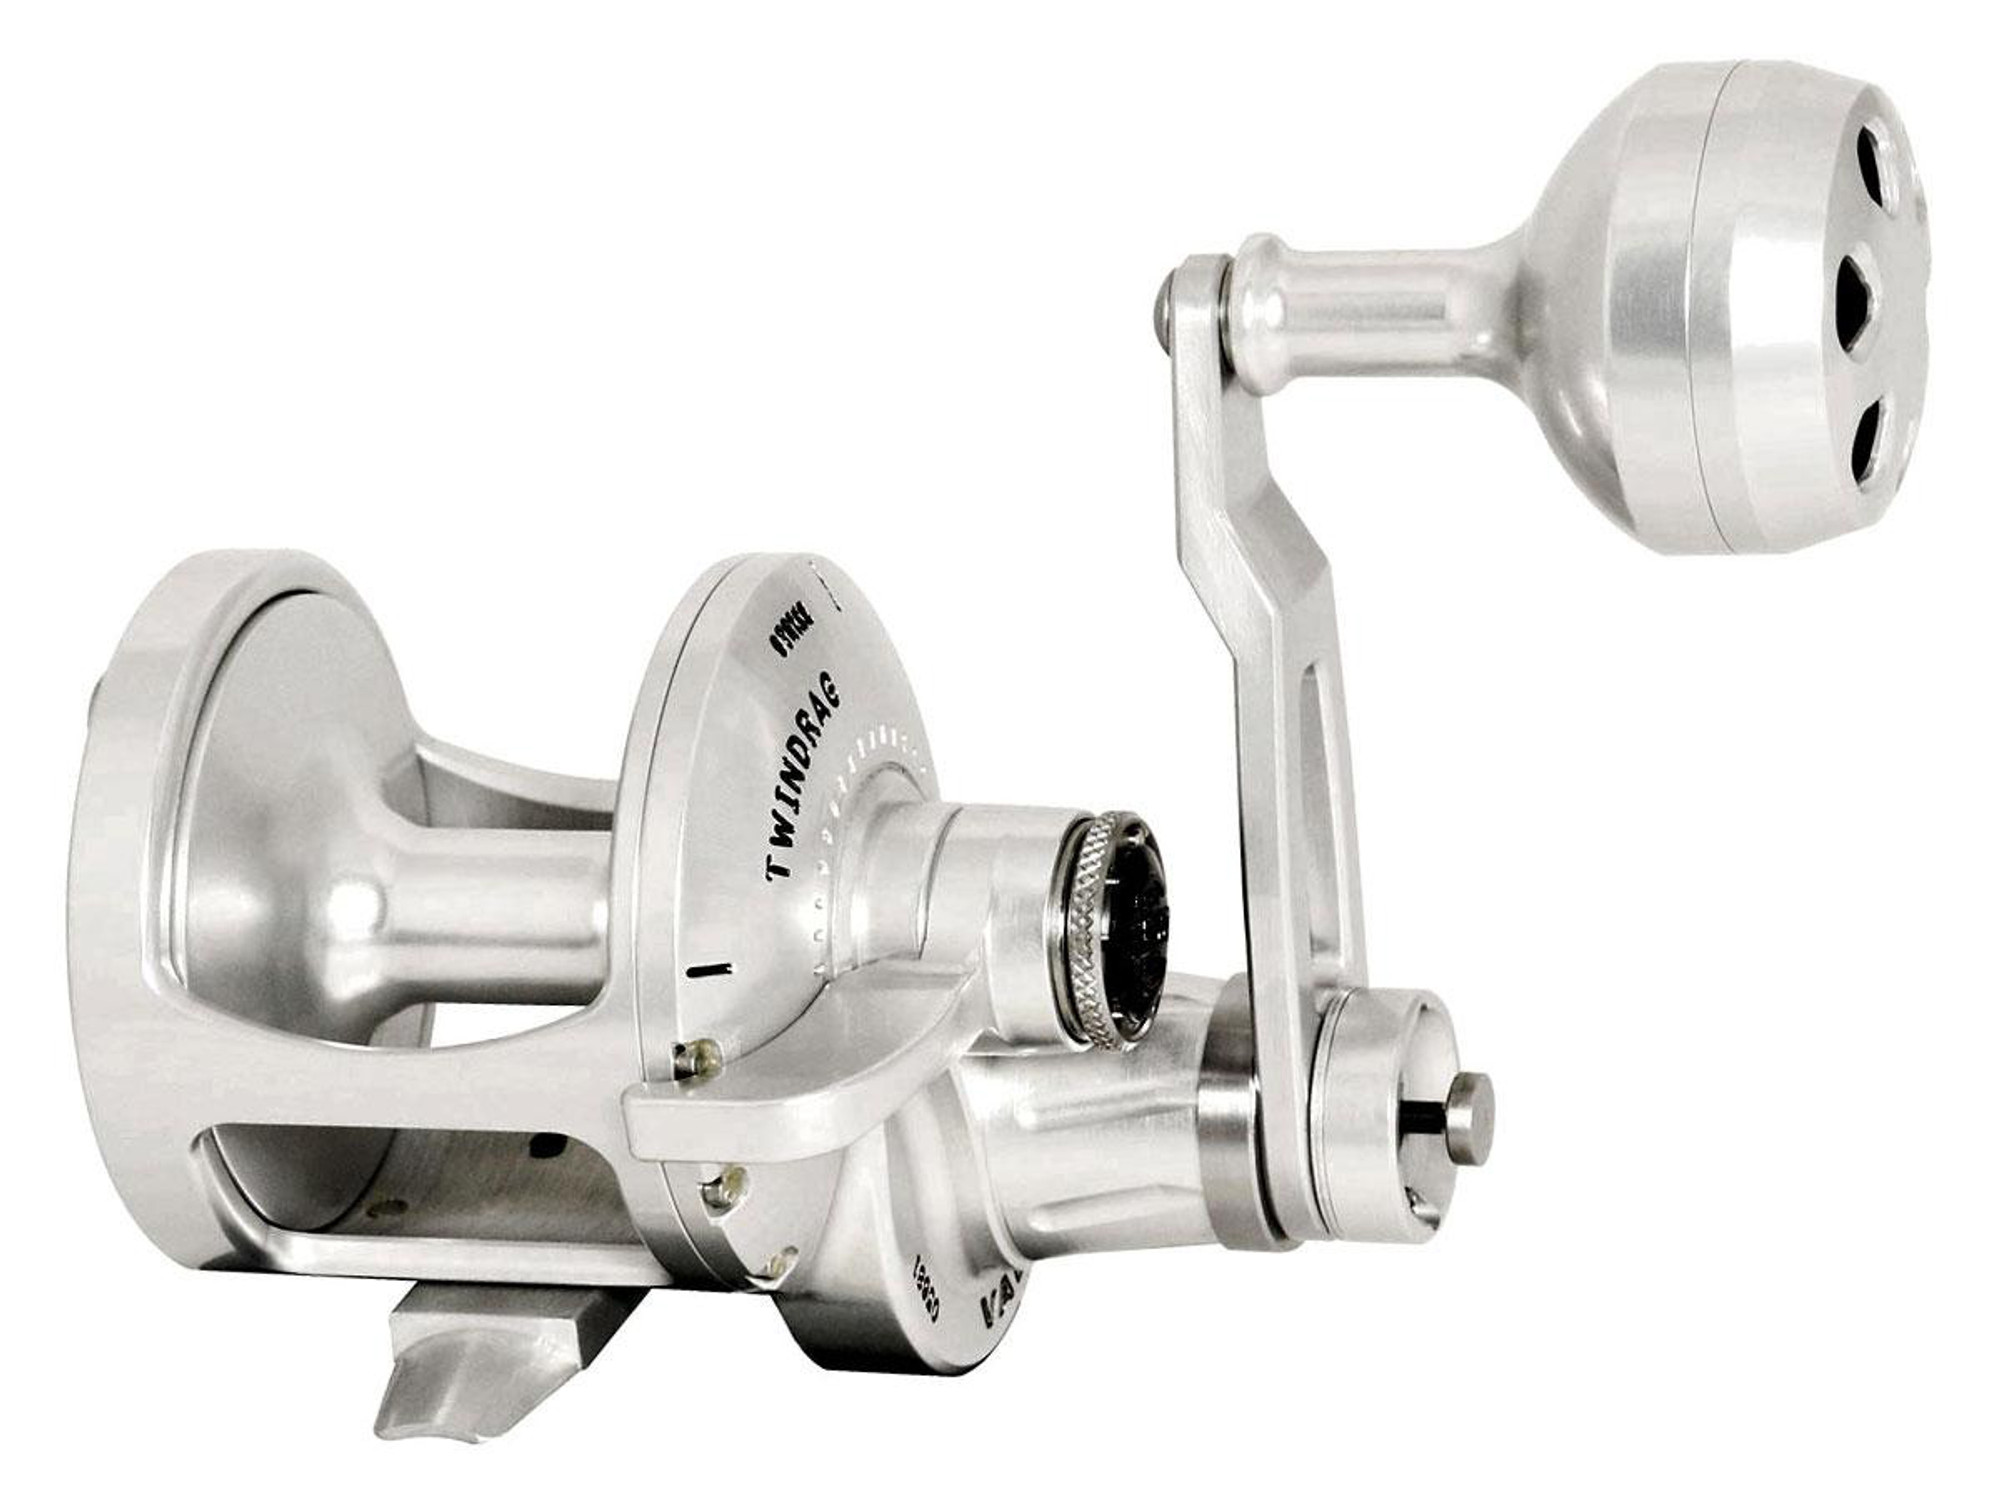 Accurate Fishing "Valiant" Series Two-Speed Fishing Reel (Size: 800N / Silver)